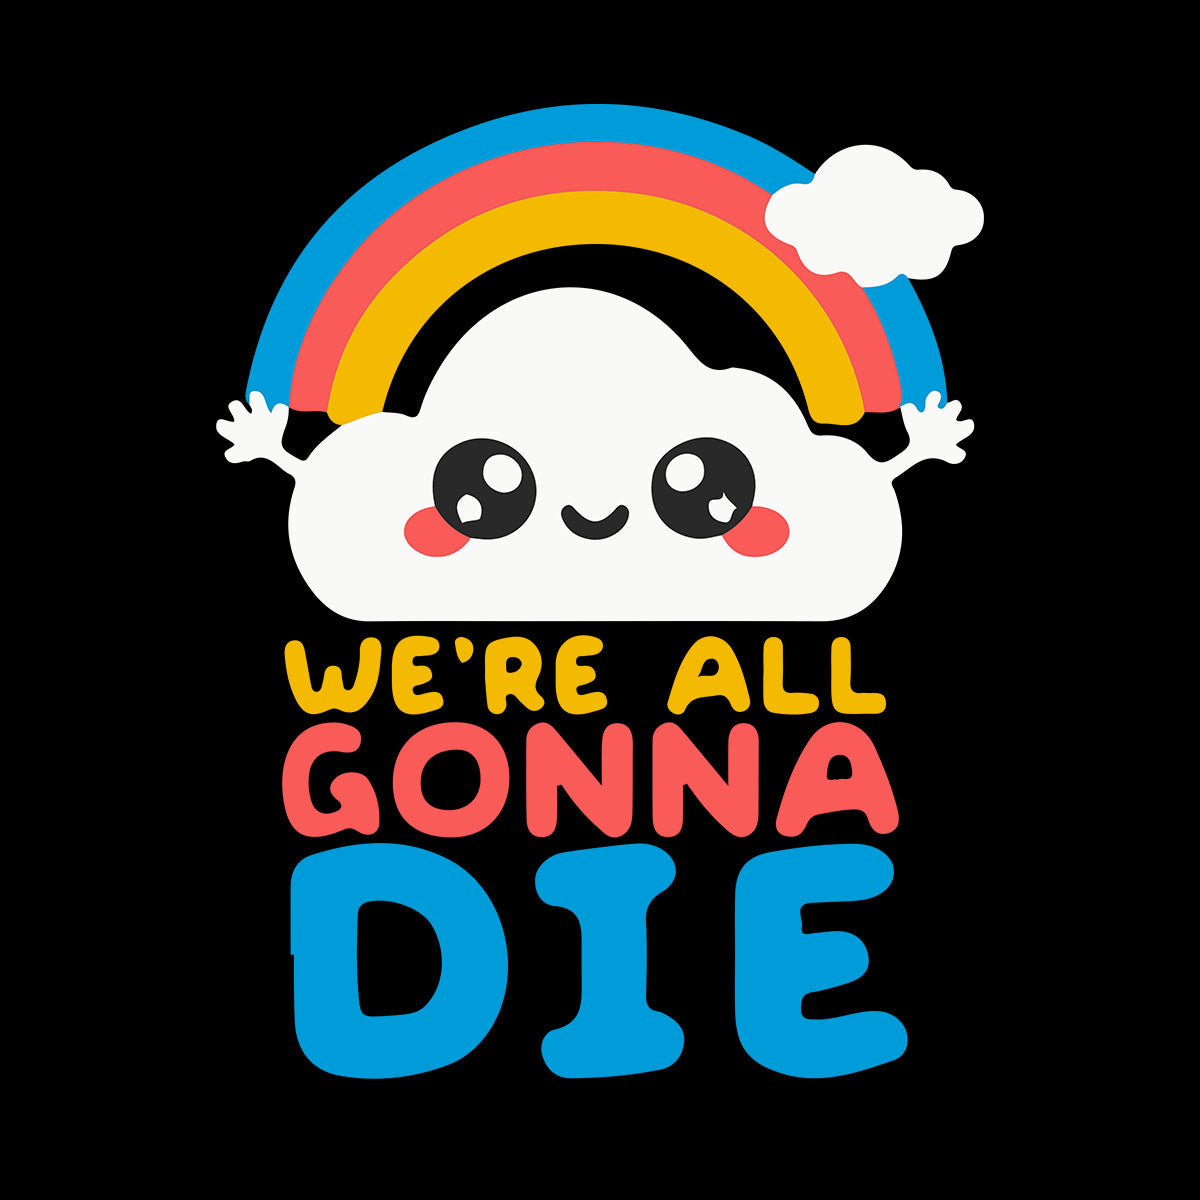 We Are All Going To Die: Happy Cloud Tee Positive Quote - Funny Unisex T-shirt - Kuzi Tees